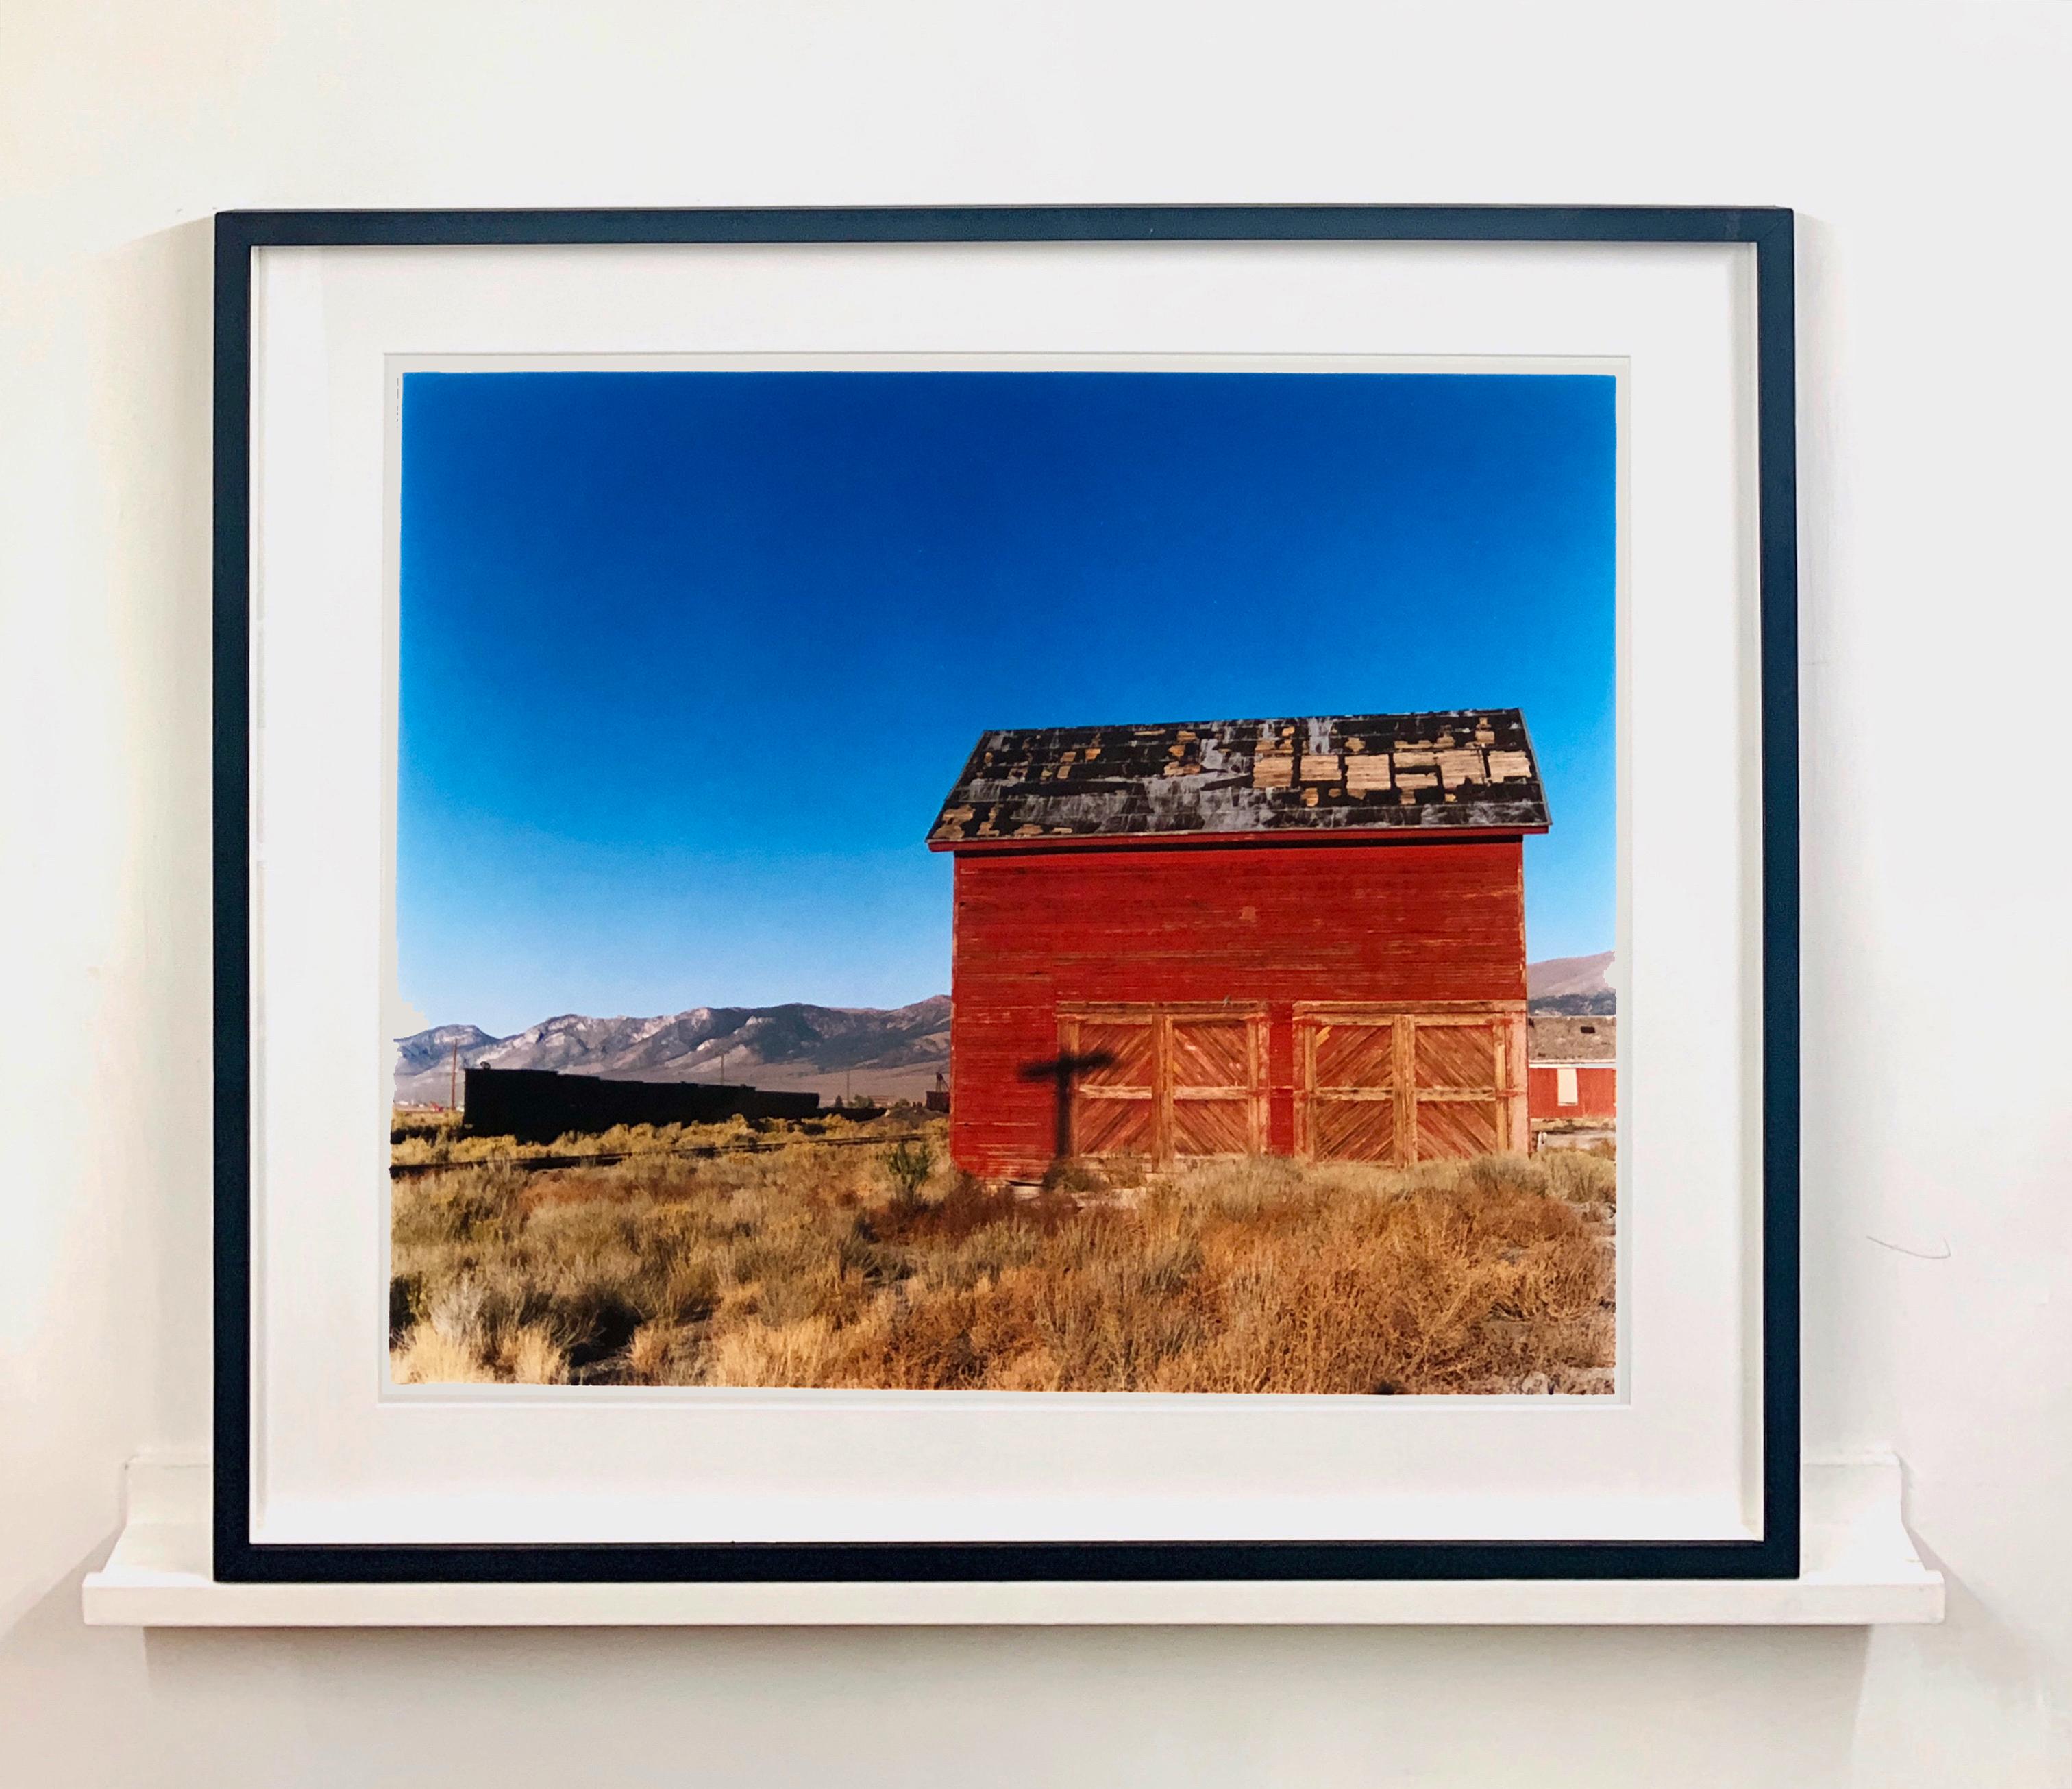 Shed - Railroad Depot, Nevada, 2003 - After the Gold Rush - Architecture Photo  - Contemporary Print by Richard Heeps